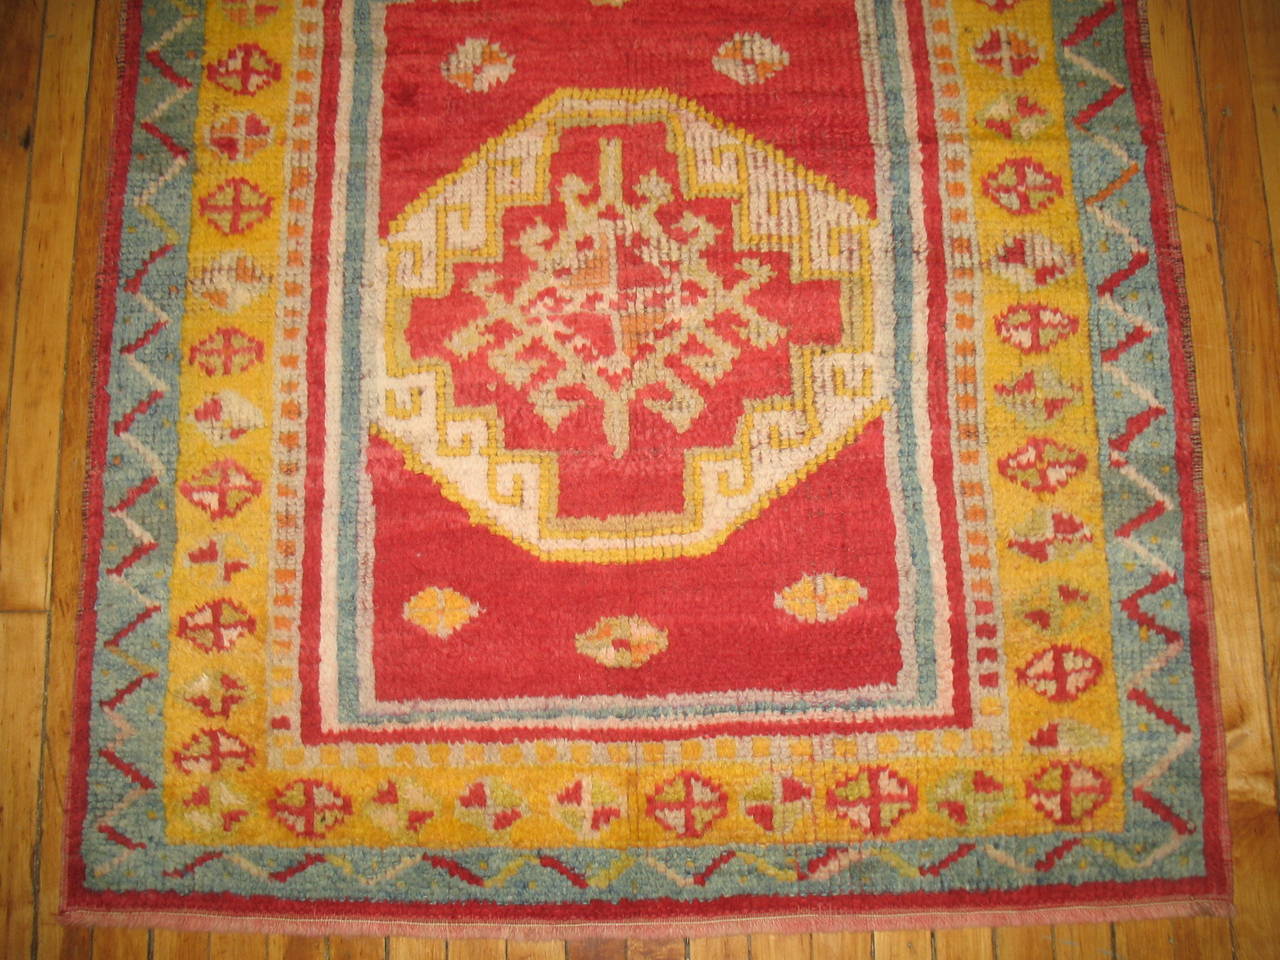 Mid-20th century Turkish Tulu rug in reds, green, yellow and blue.

Measures: 3'8